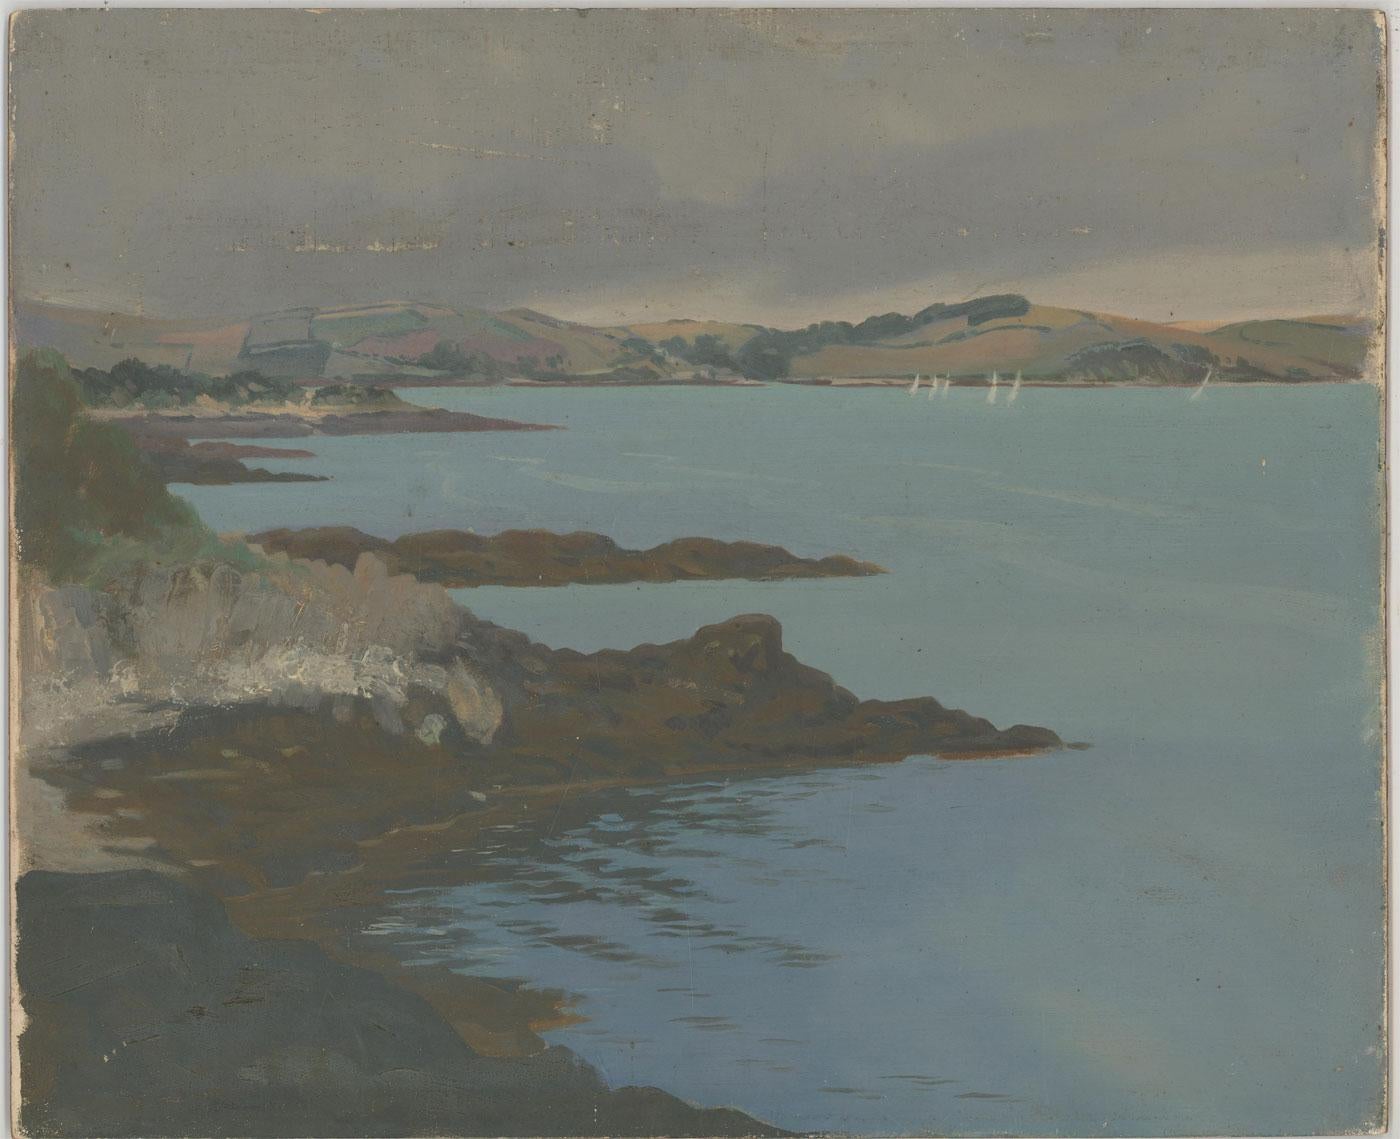 A wonderful coastal landscape by the British artist Laurence H.F. Irving (1897-1988). Here he has captured an atmospheric scene, with dark rocks jutting out towards the sea. Sailing ships can be seen in the distance, while some ominous looking